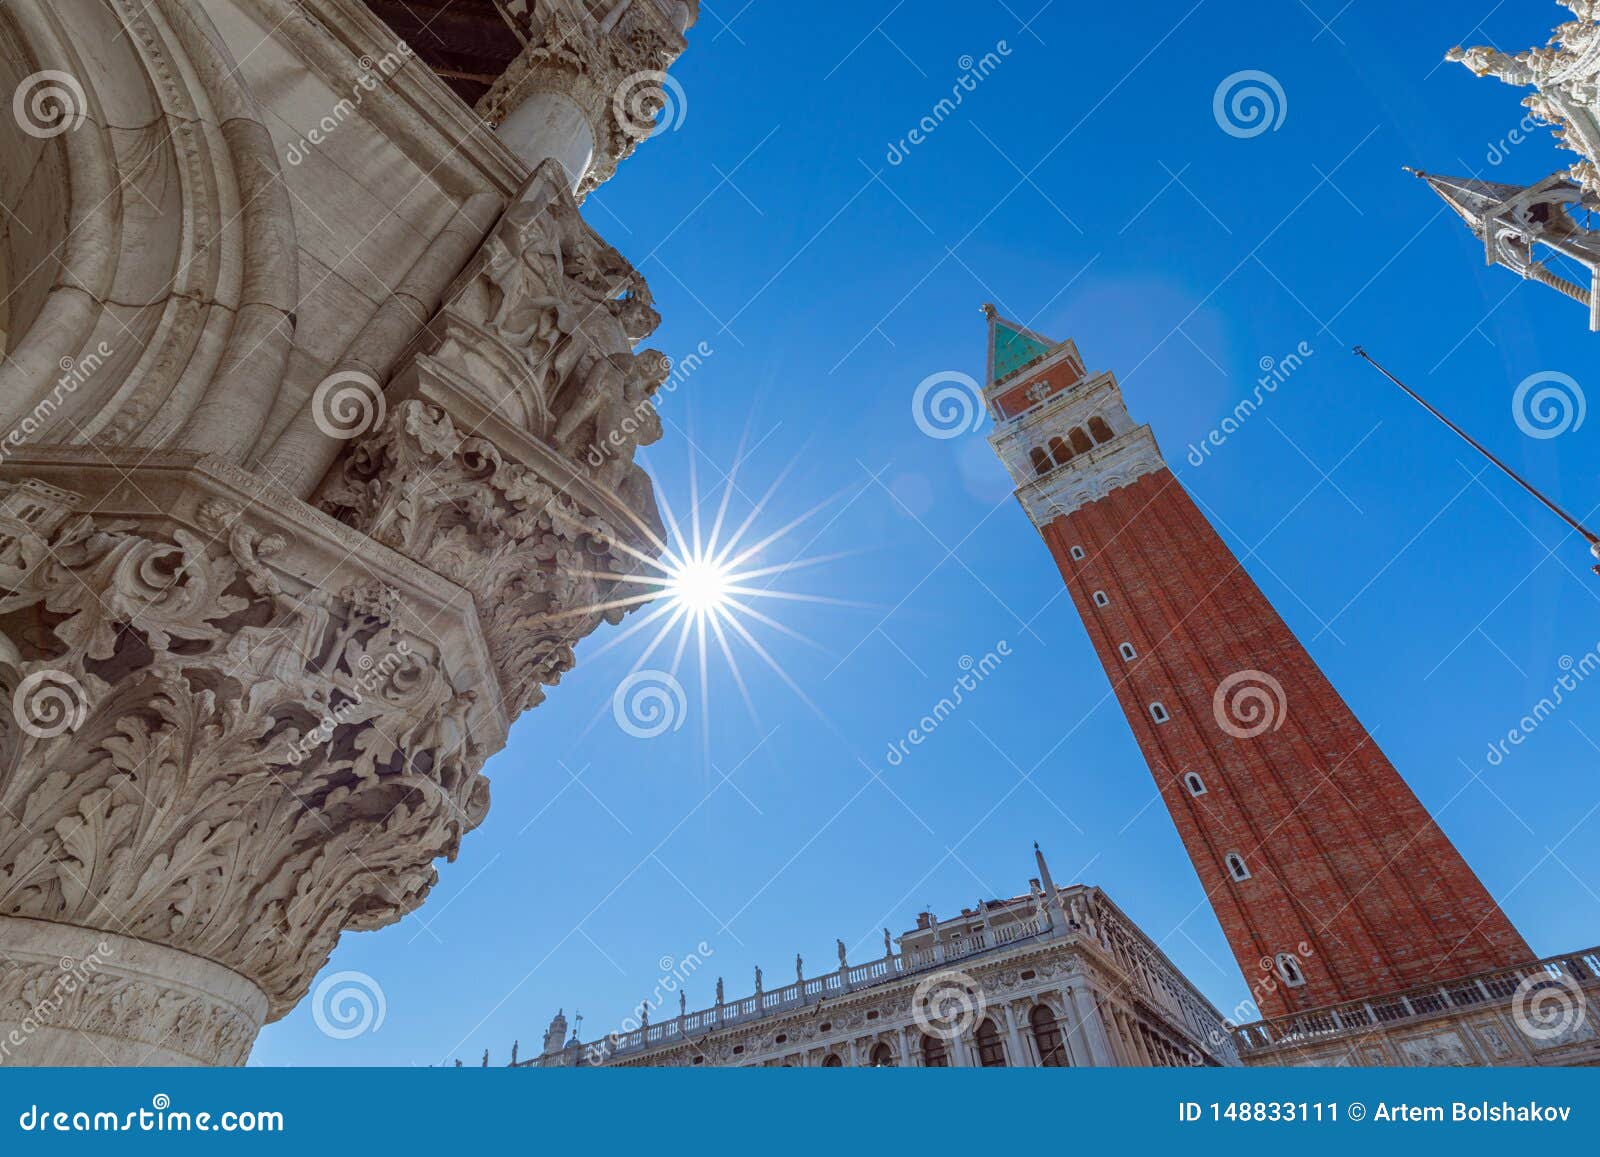 Worlds Most Beautiful Square San Marco Piazza San Marco